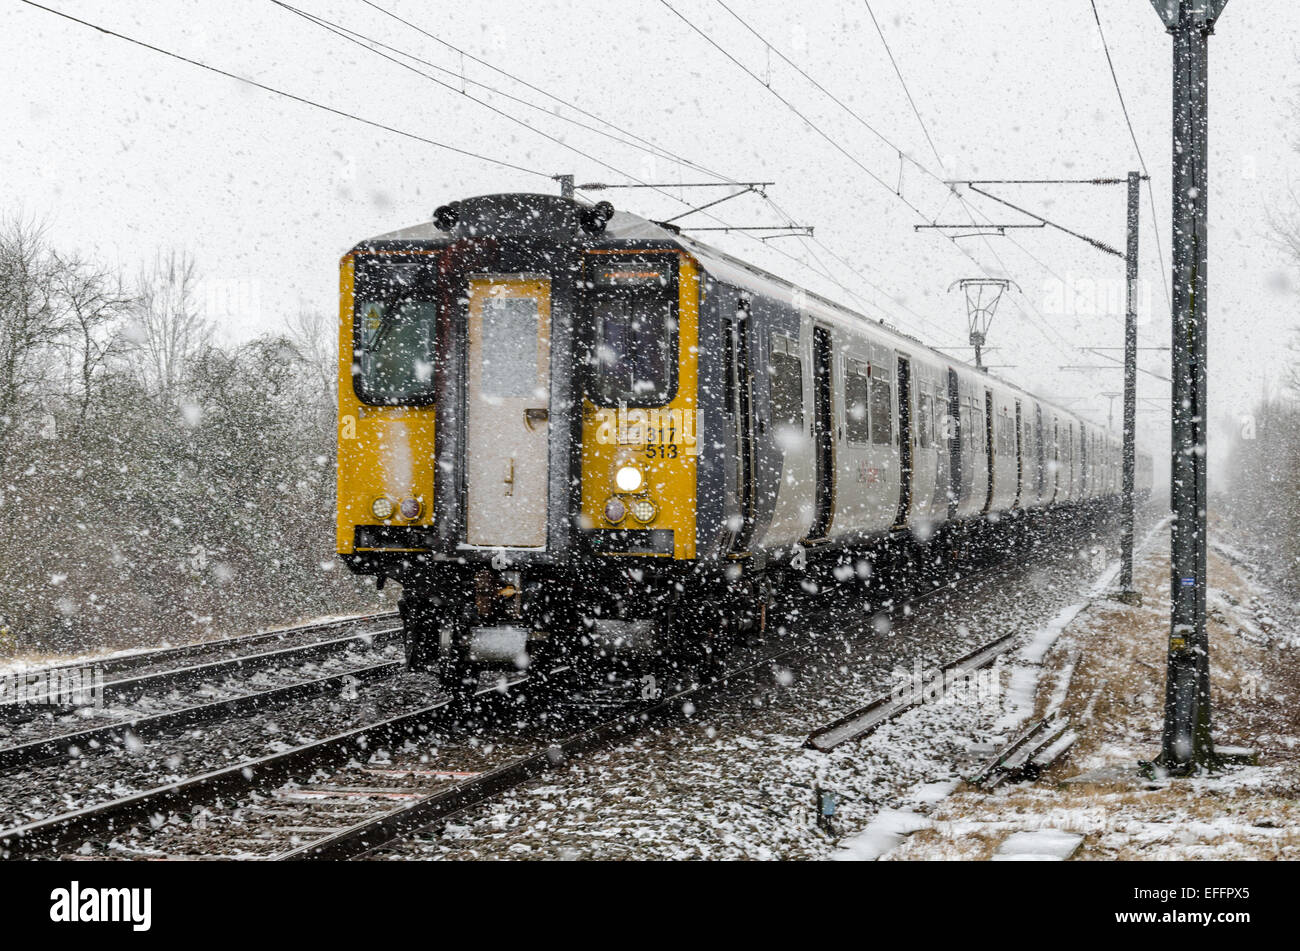 Train in snowy conditions Stock Photo